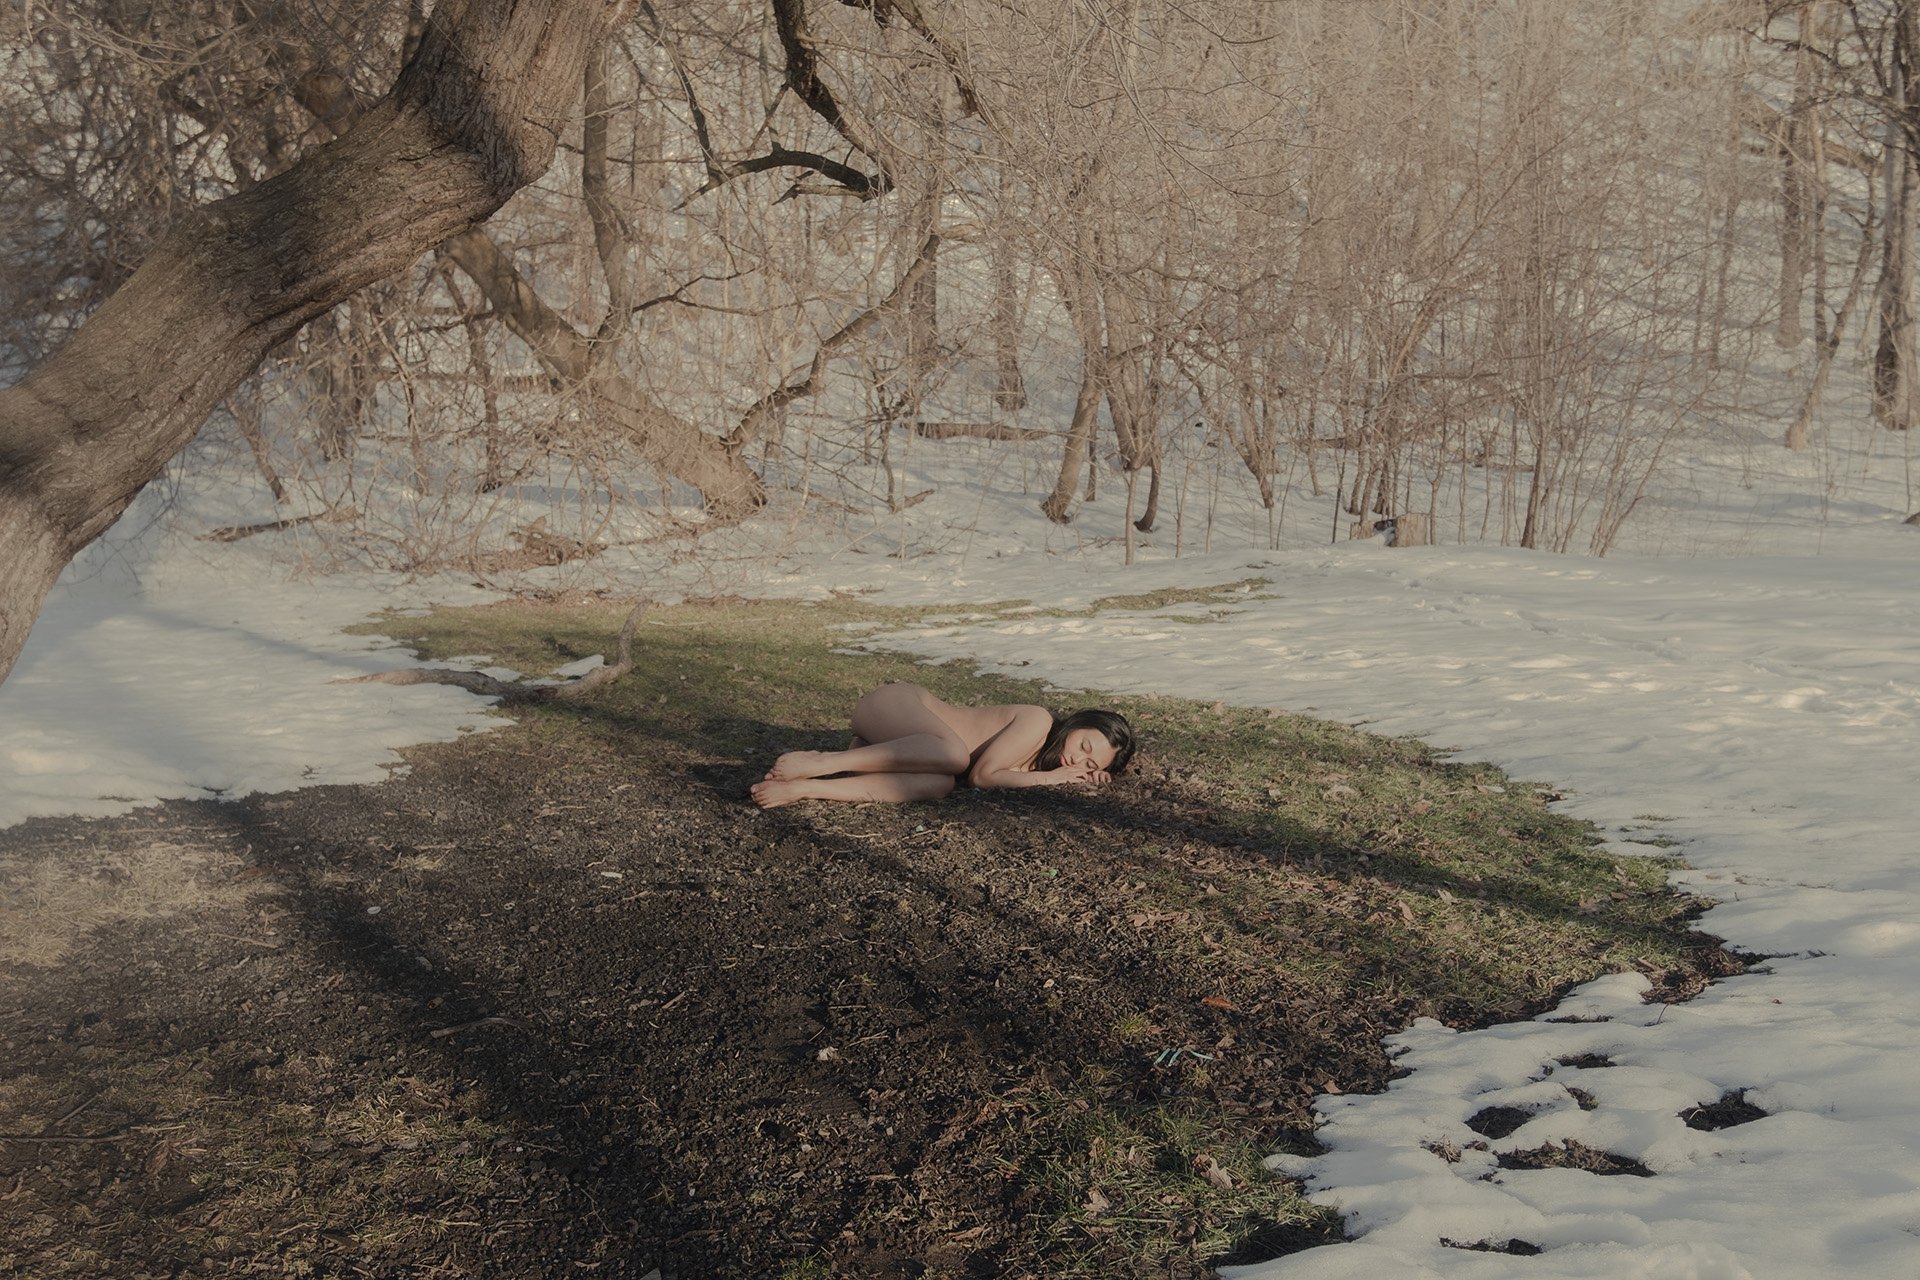 Chelsey: In a forest in the winter, a nude feminine figure lies with eyes closed in a circle of grass where the outside is surrounded by snow.